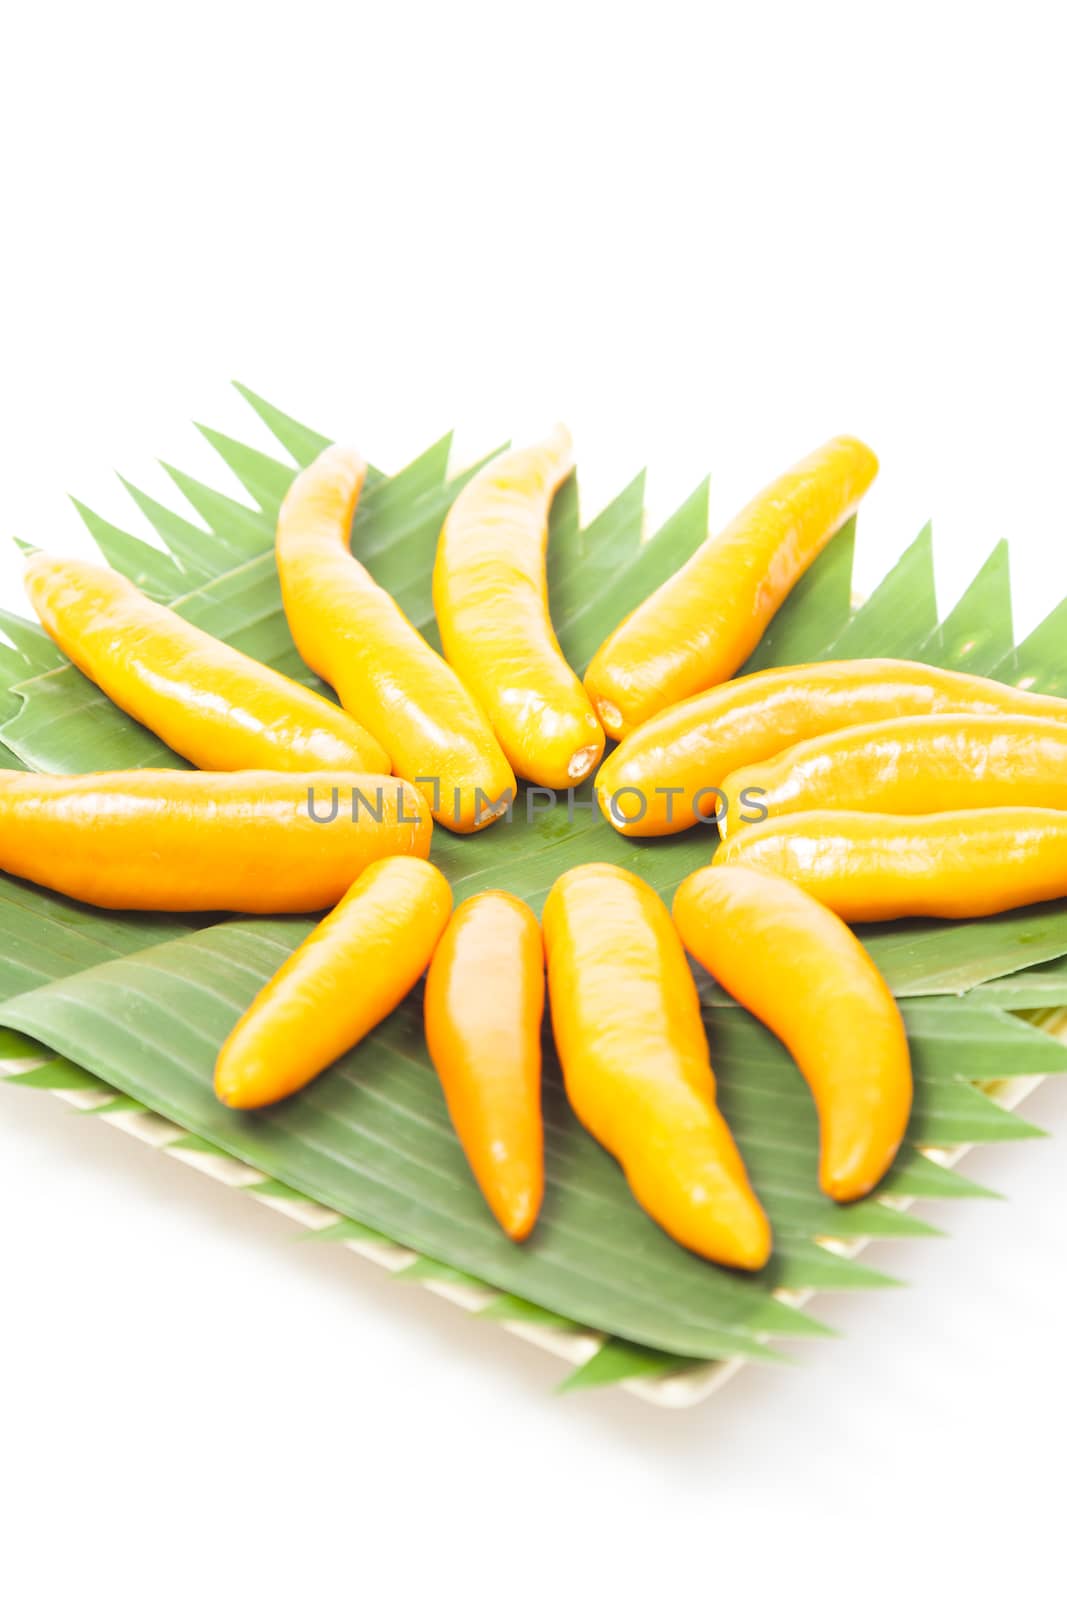 Capsicum on plate Yellow sweet peppers on a white background.